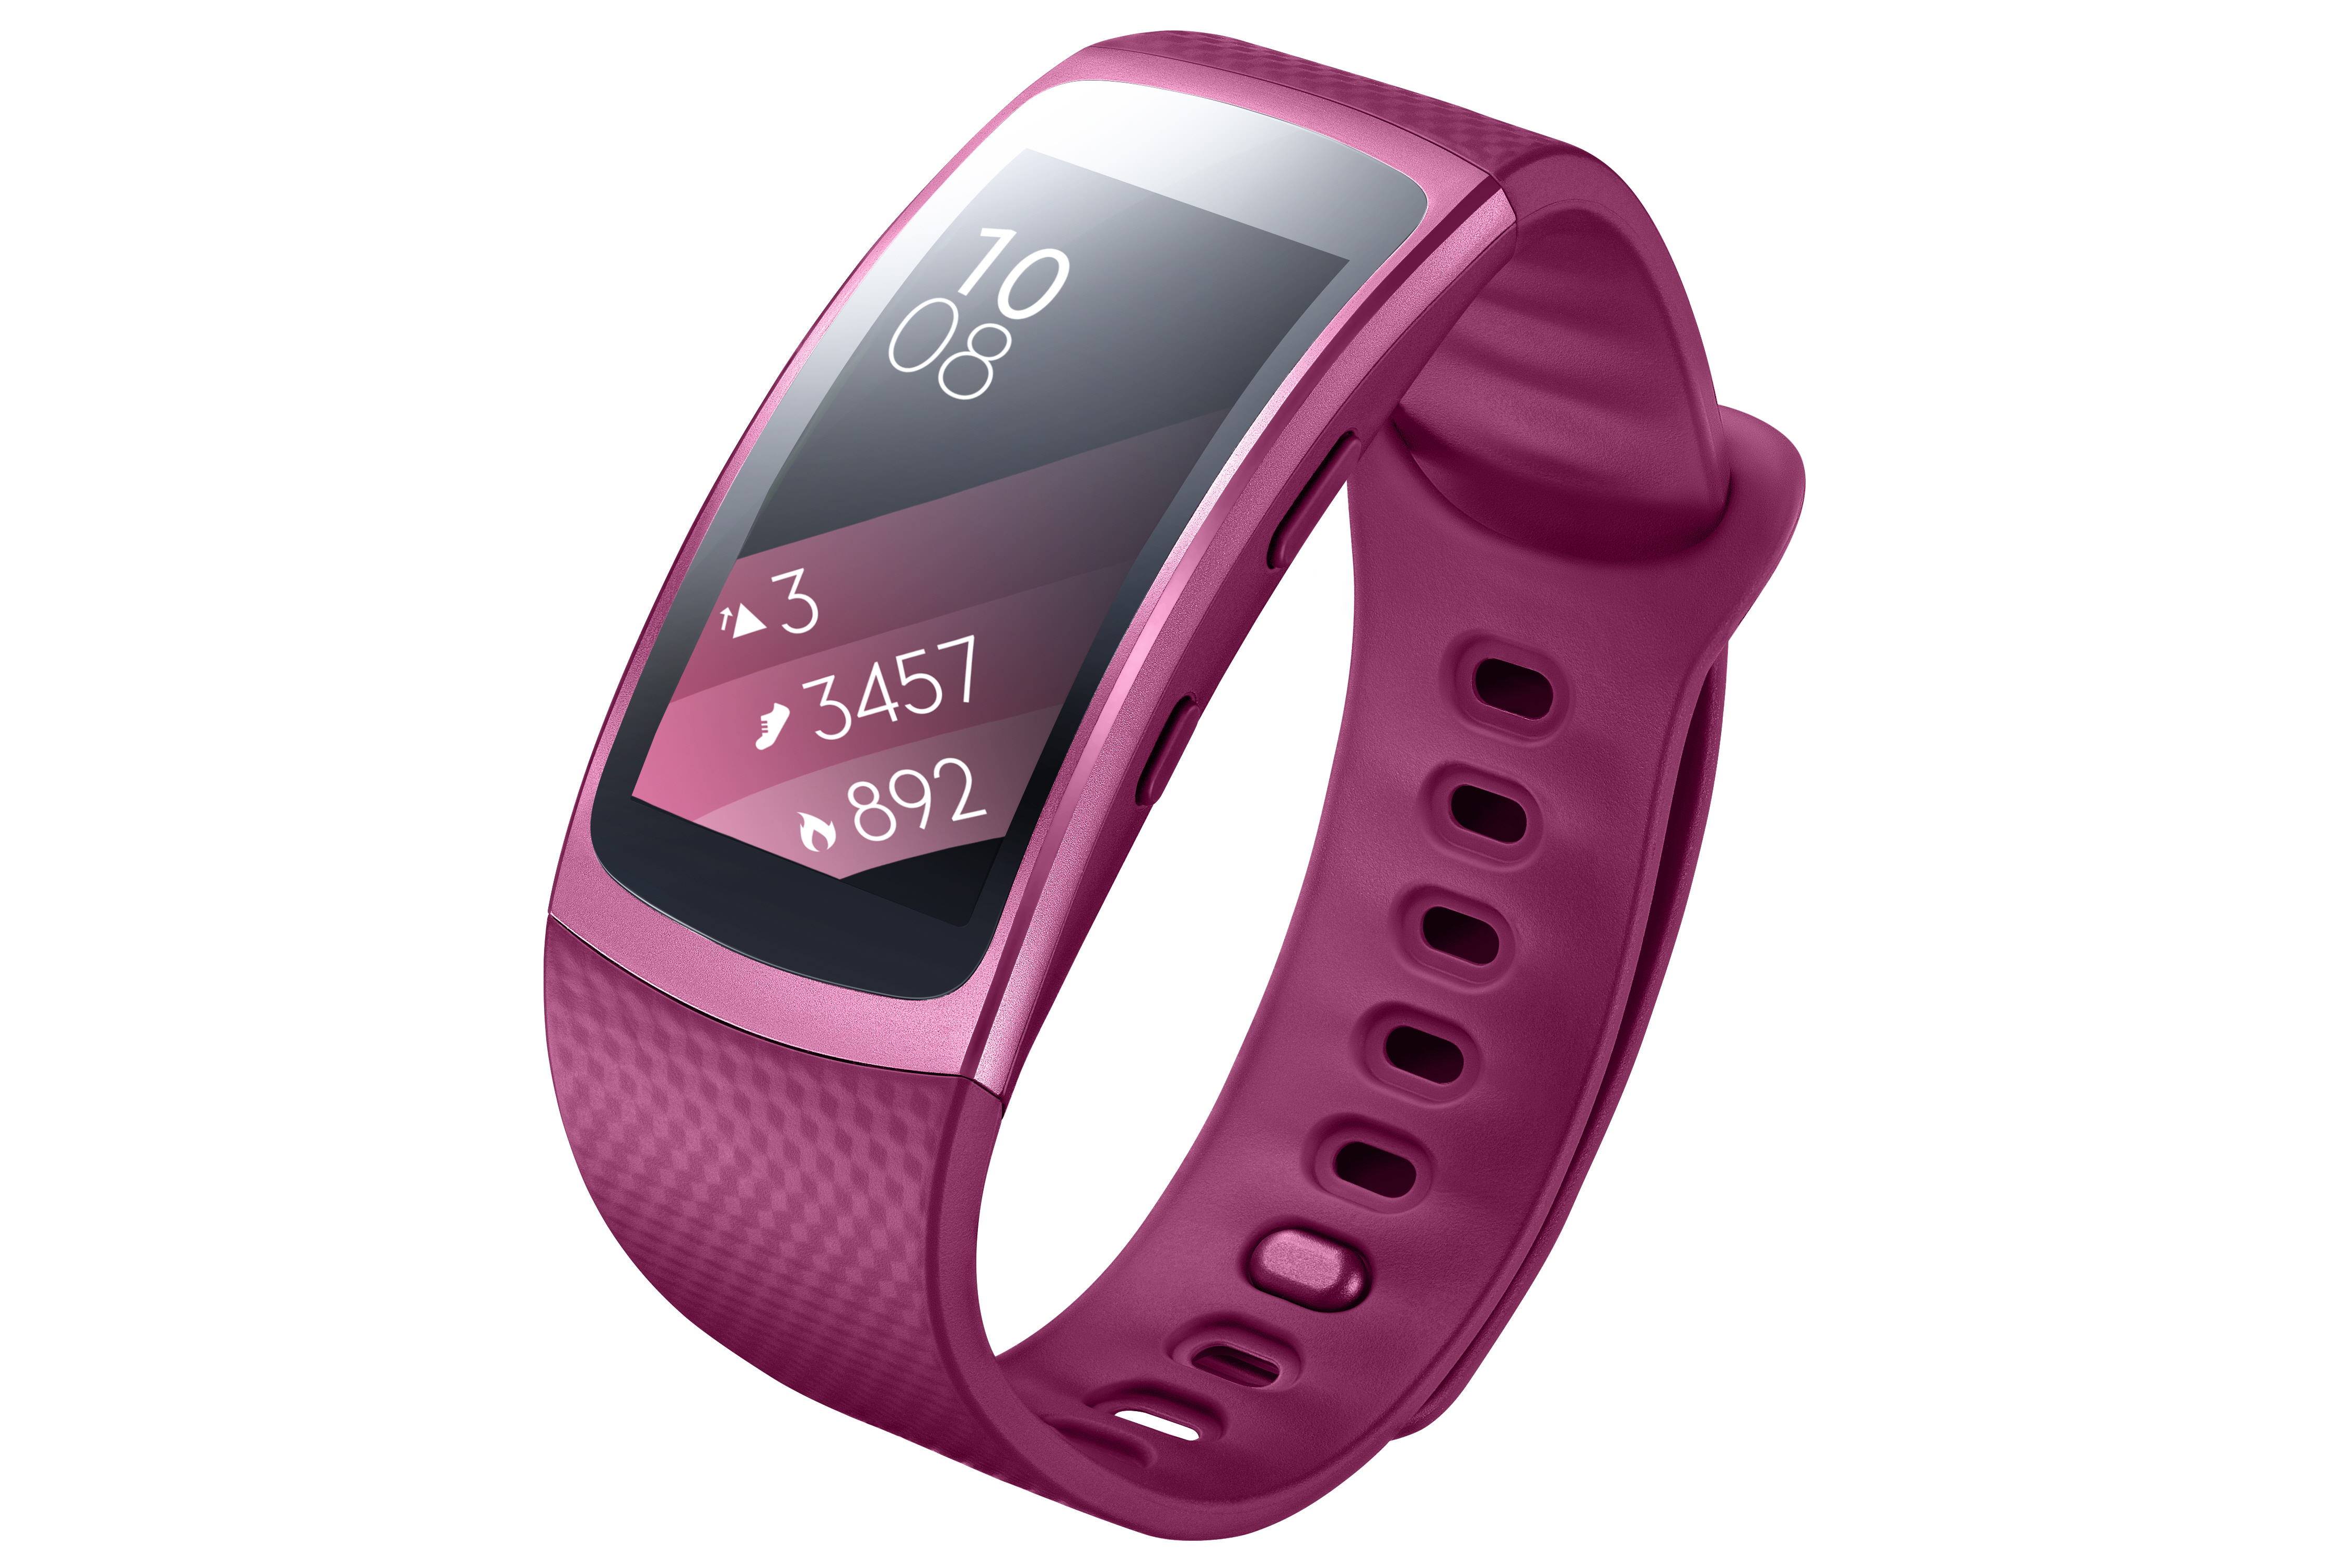 Galaxy fit 3 pink gold. Самсунг галакси фит 2. Фитнес-браслет Samsung Galaxy Fit 2. Браслет для Samsung Fit 2. Фитнес-браслет Samsung Galaxy fit2 Red.